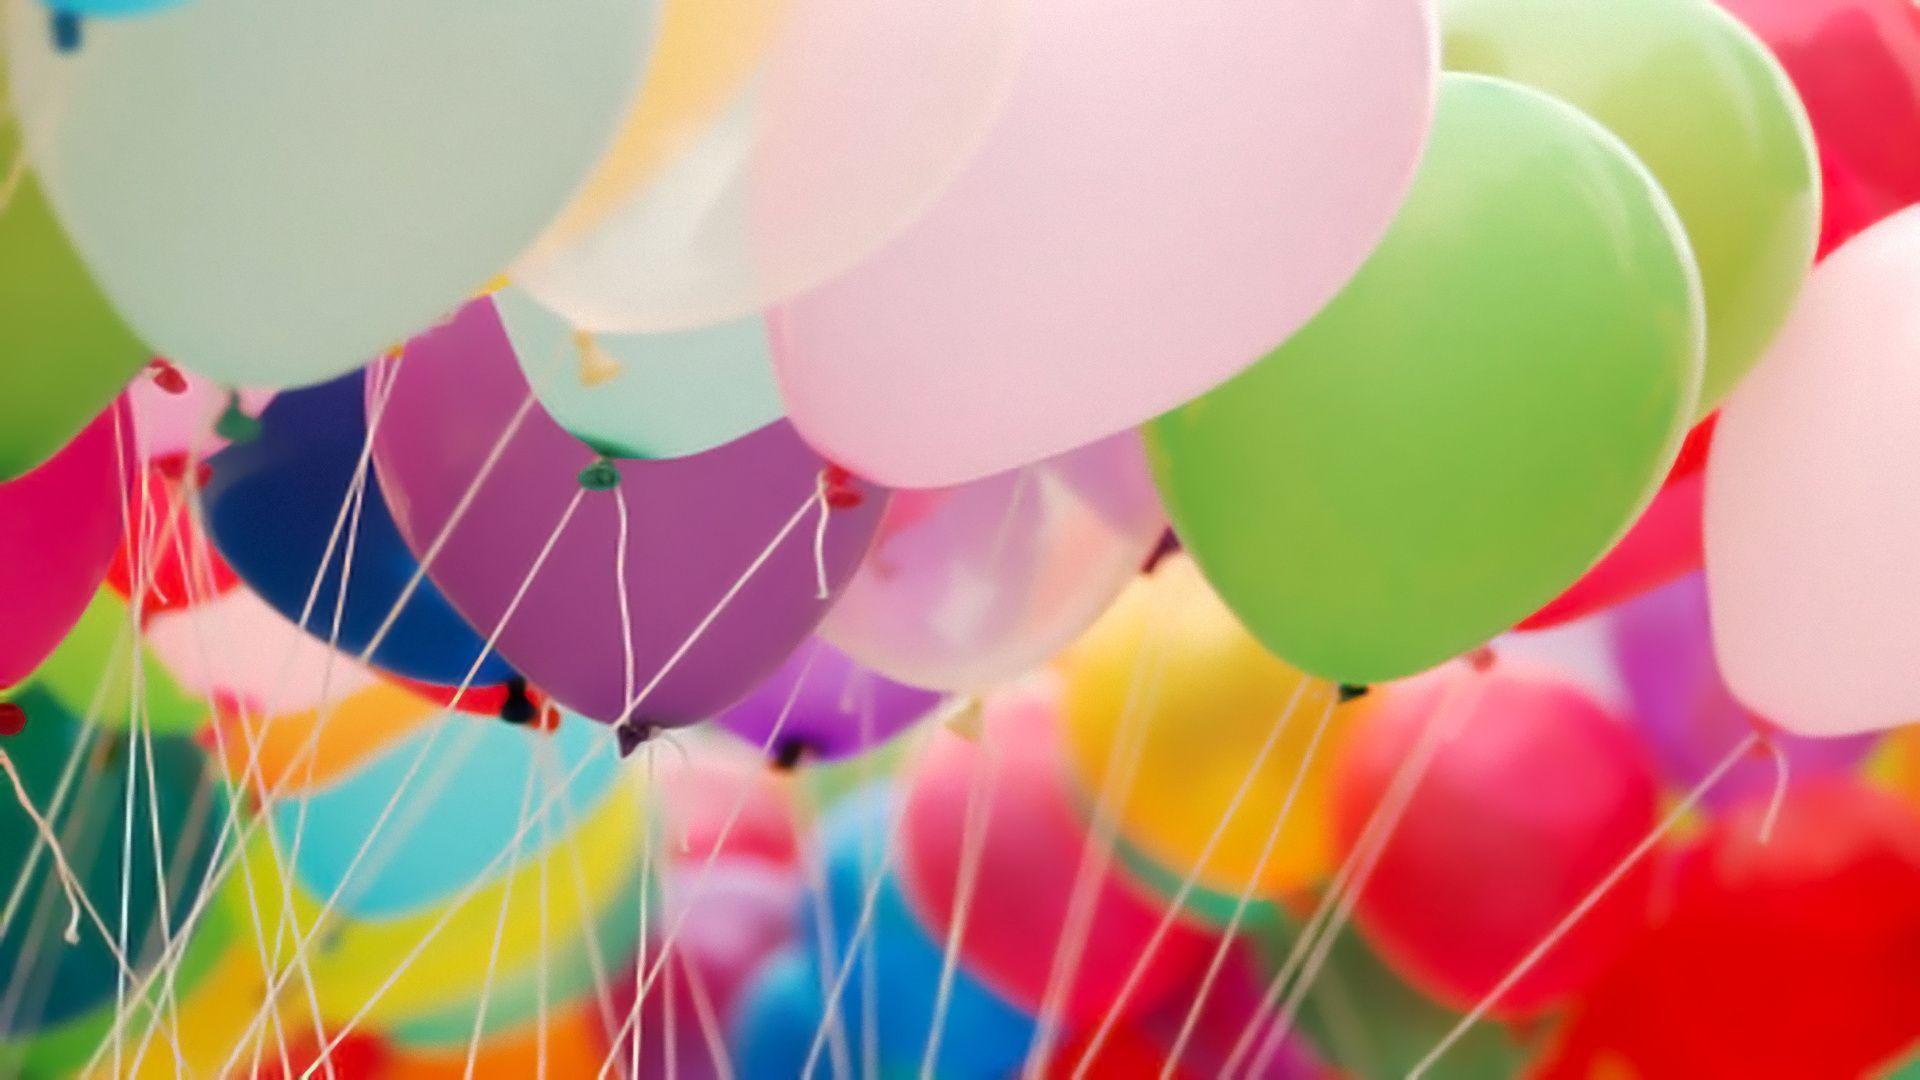 Party Balloons Wallpapers - Top Free Party Balloons Backgrounds